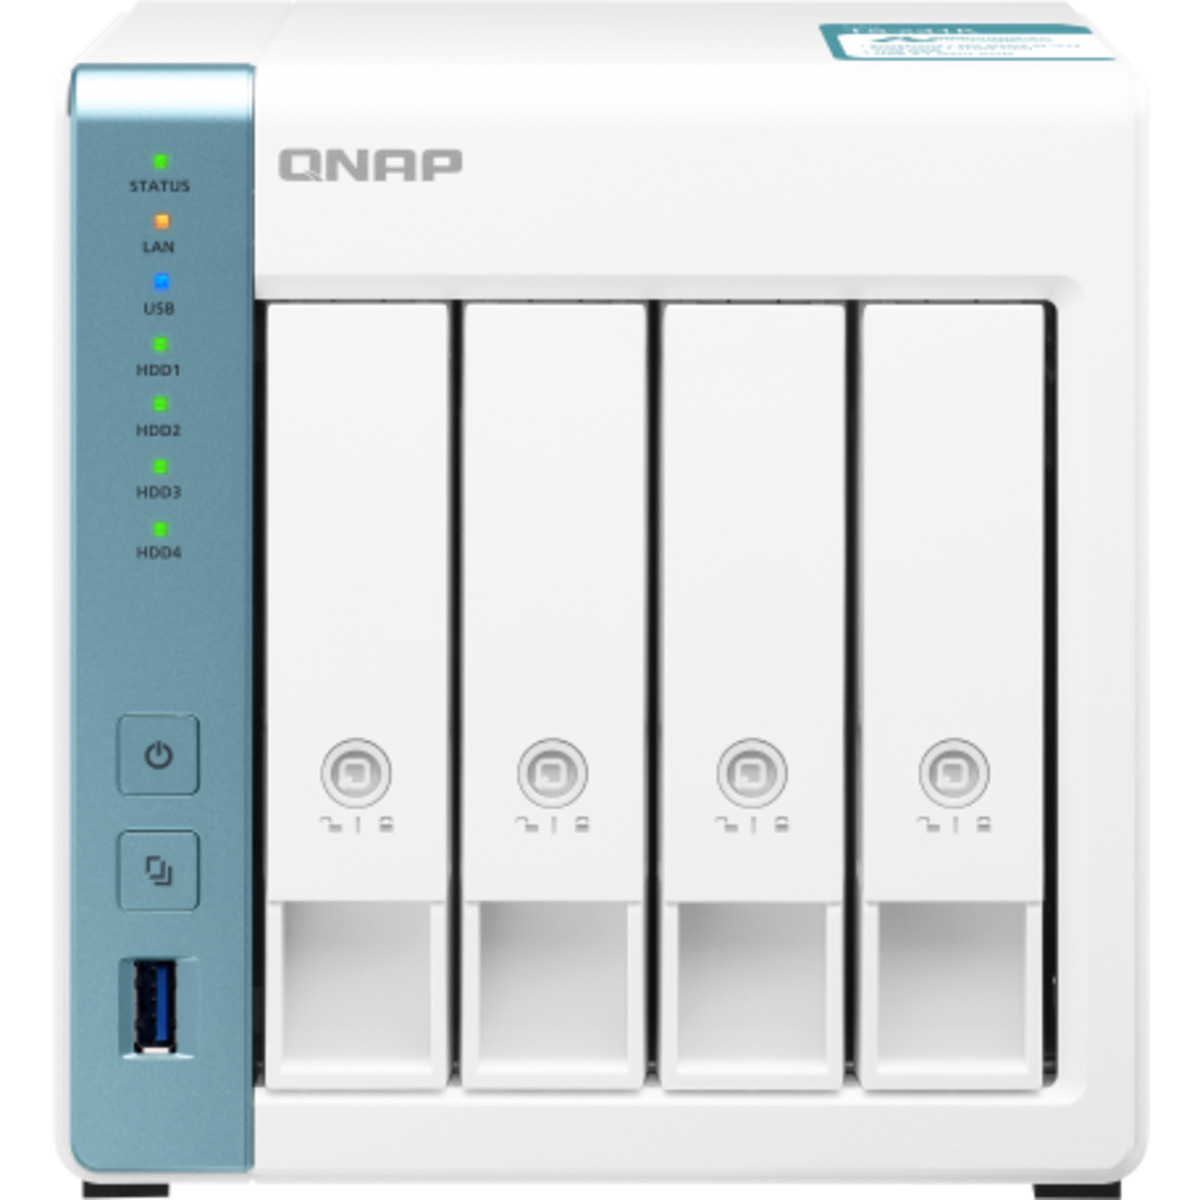 QNAP TS-431K 54tb 4-Bay Desktop Personal / Basic Home / Small Office NAS - Network Attached Storage Device 3x18tb Seagate EXOS X18 ST18000NM000J 3.5 7200rpm SATA 6Gb/s HDD ENTERPRISE Class Drives Installed - Burn-In Tested TS-431K